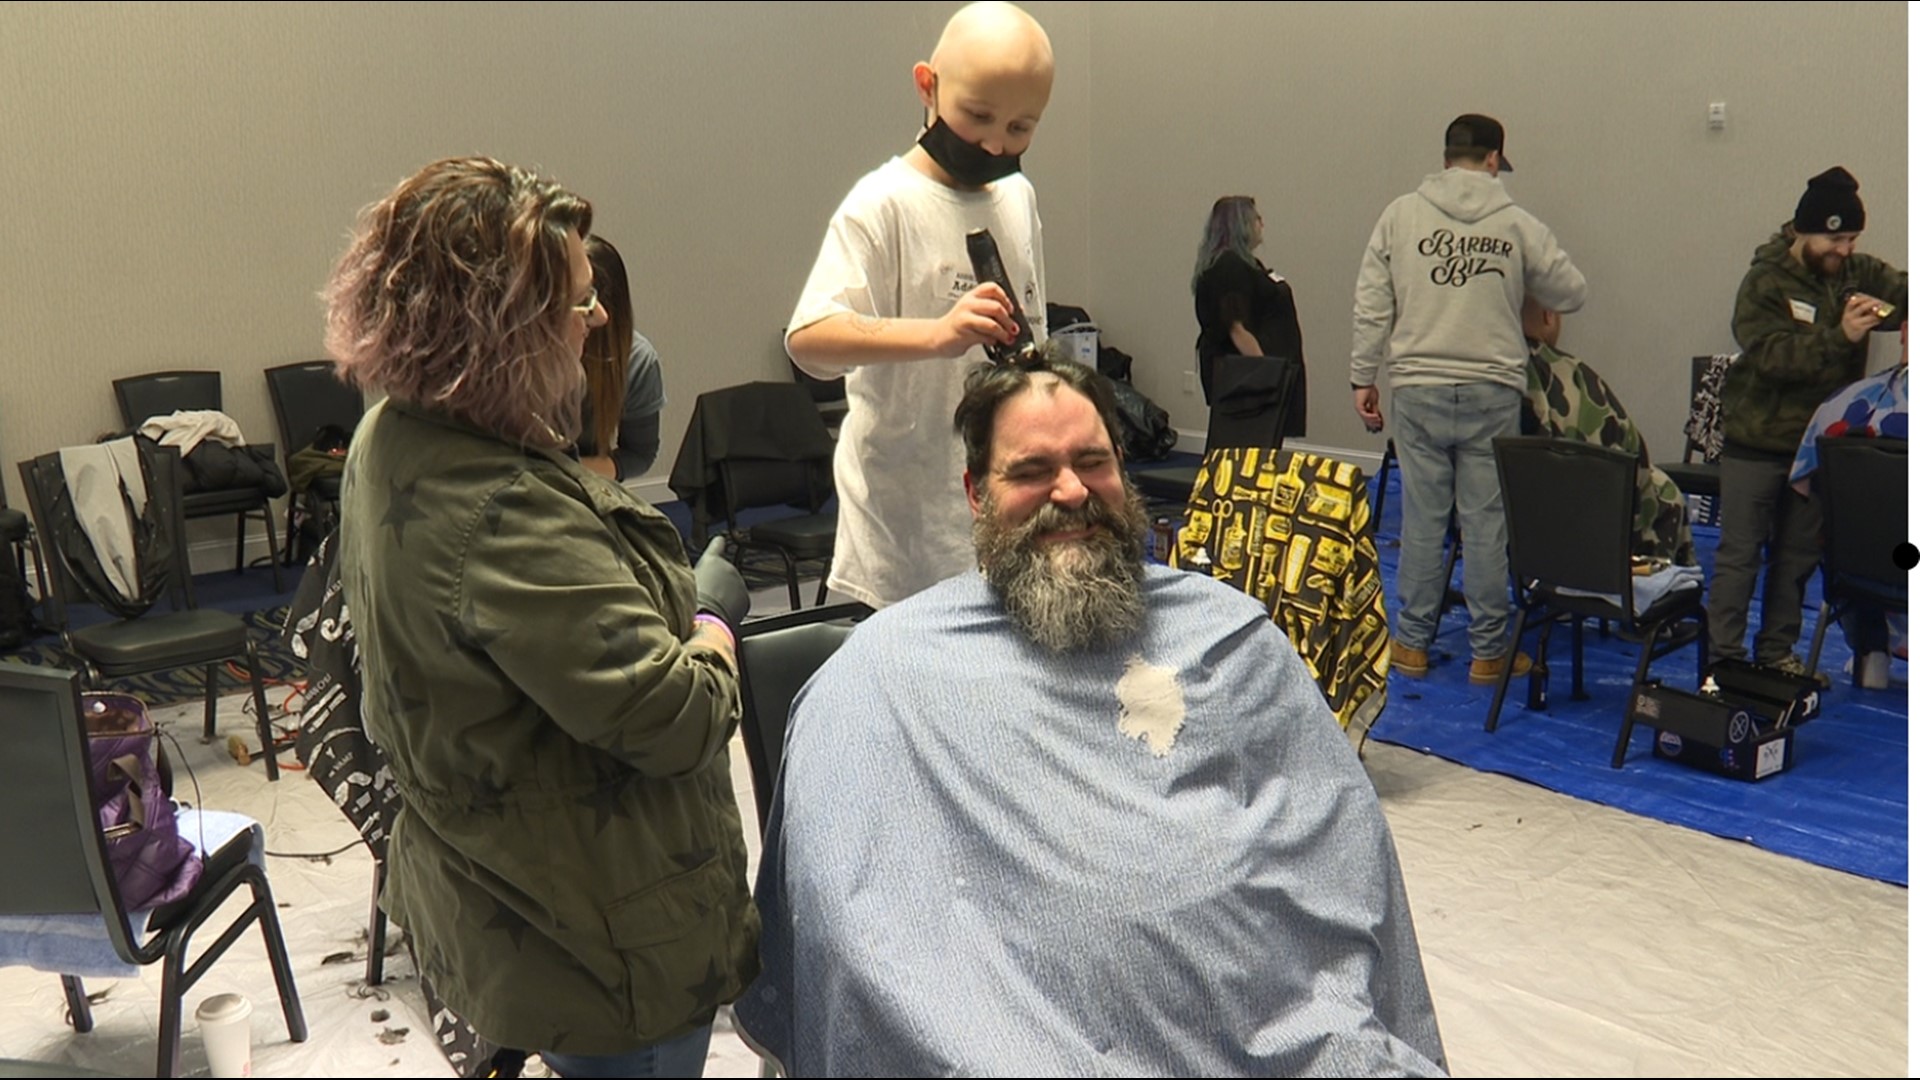 All day long, folks from far and wide flocked to Dunmore to get their hair cut, supporting a little girl from Archbald with a rare form of cancer.